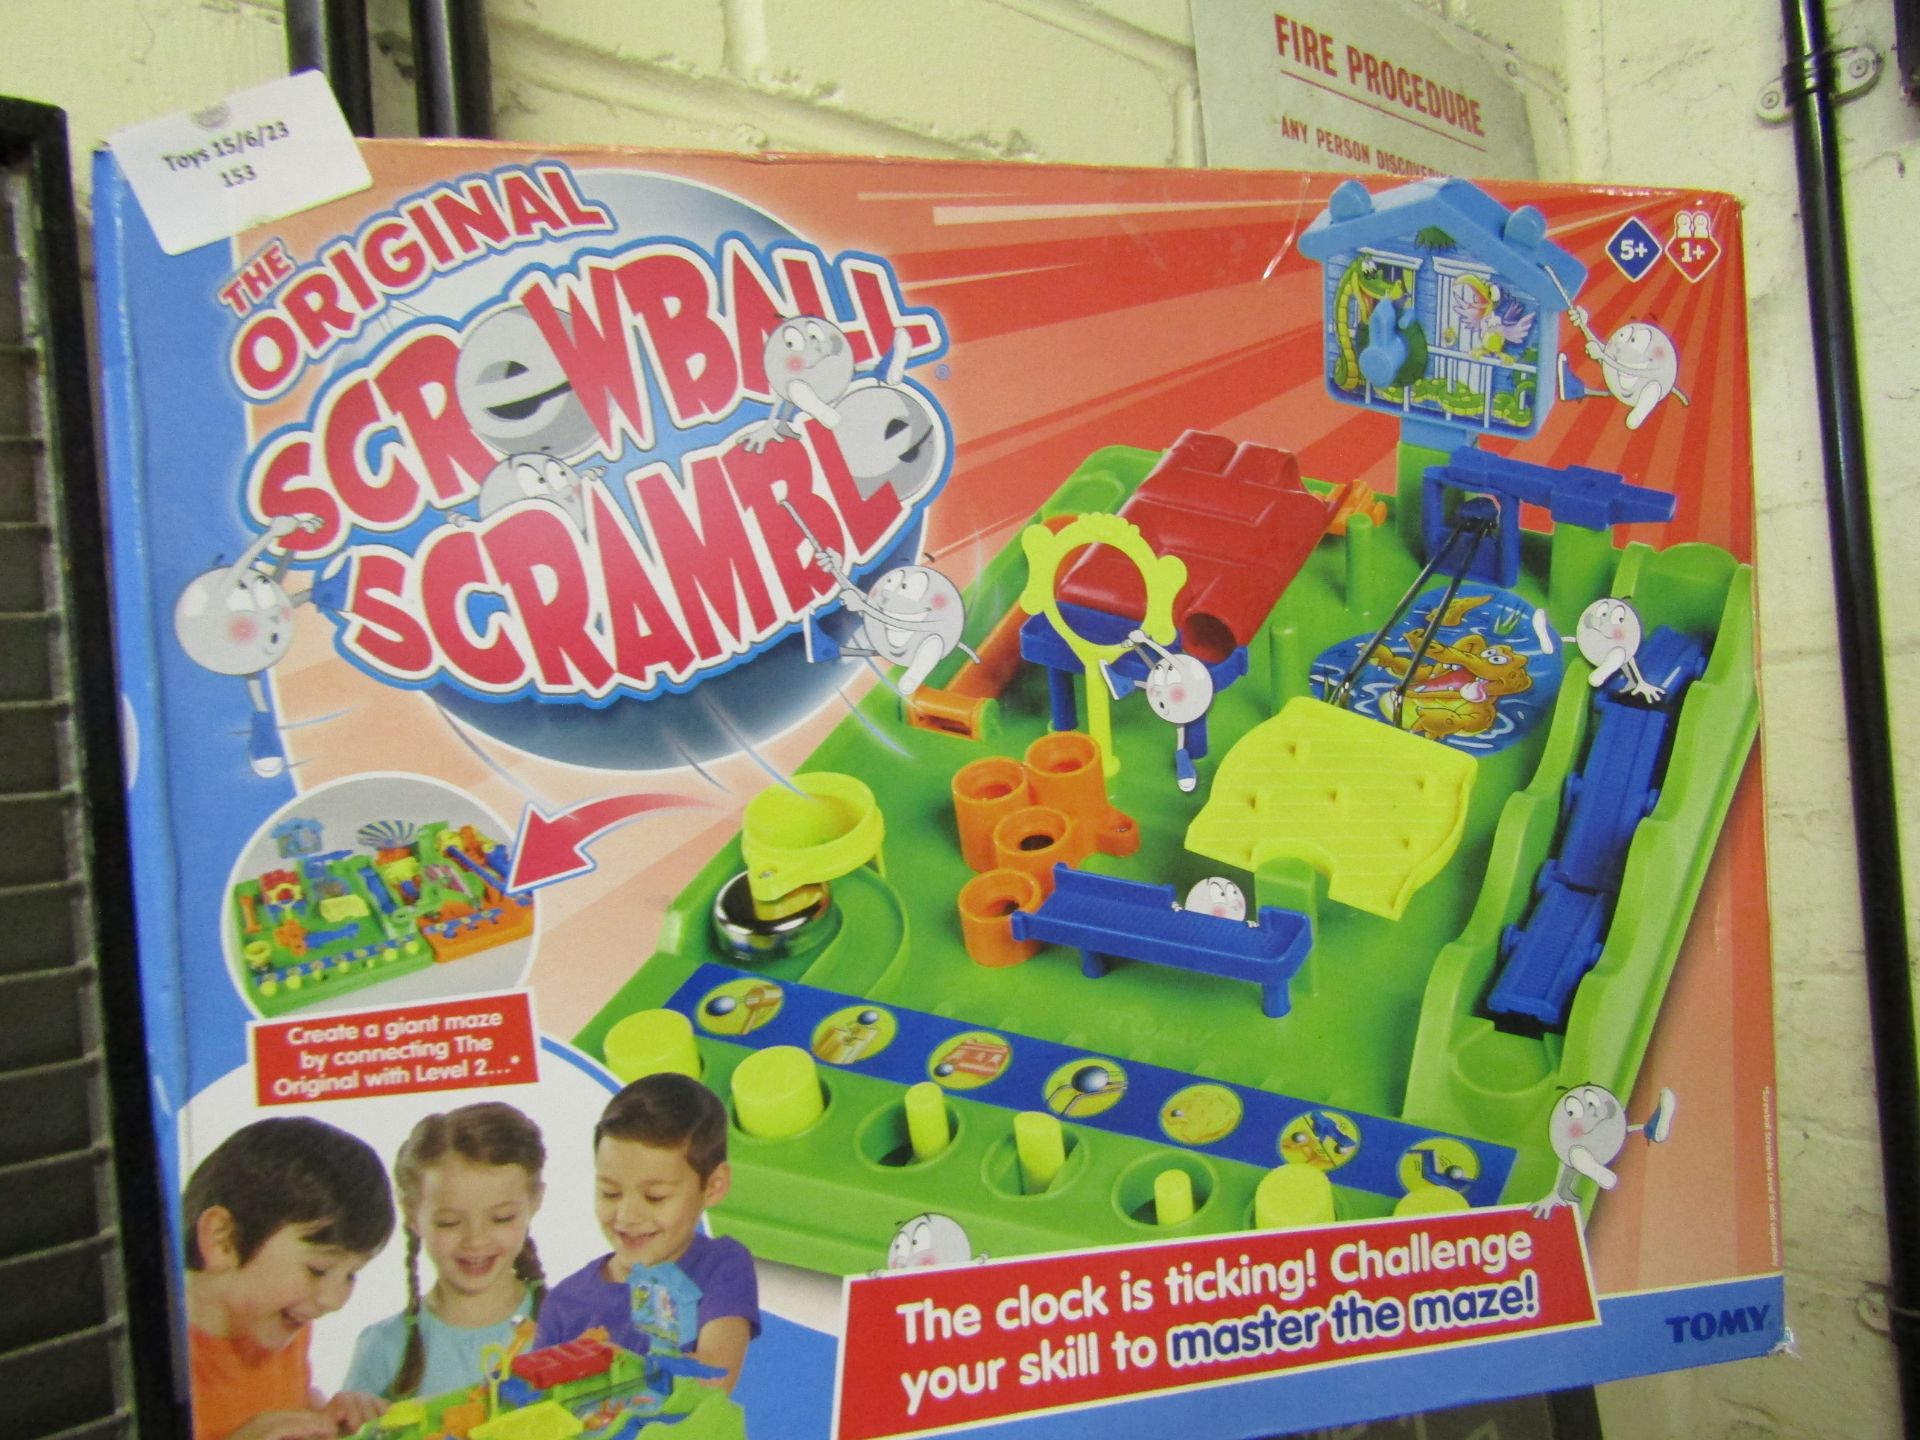 Original Screwball scramble, boxed and unchecked